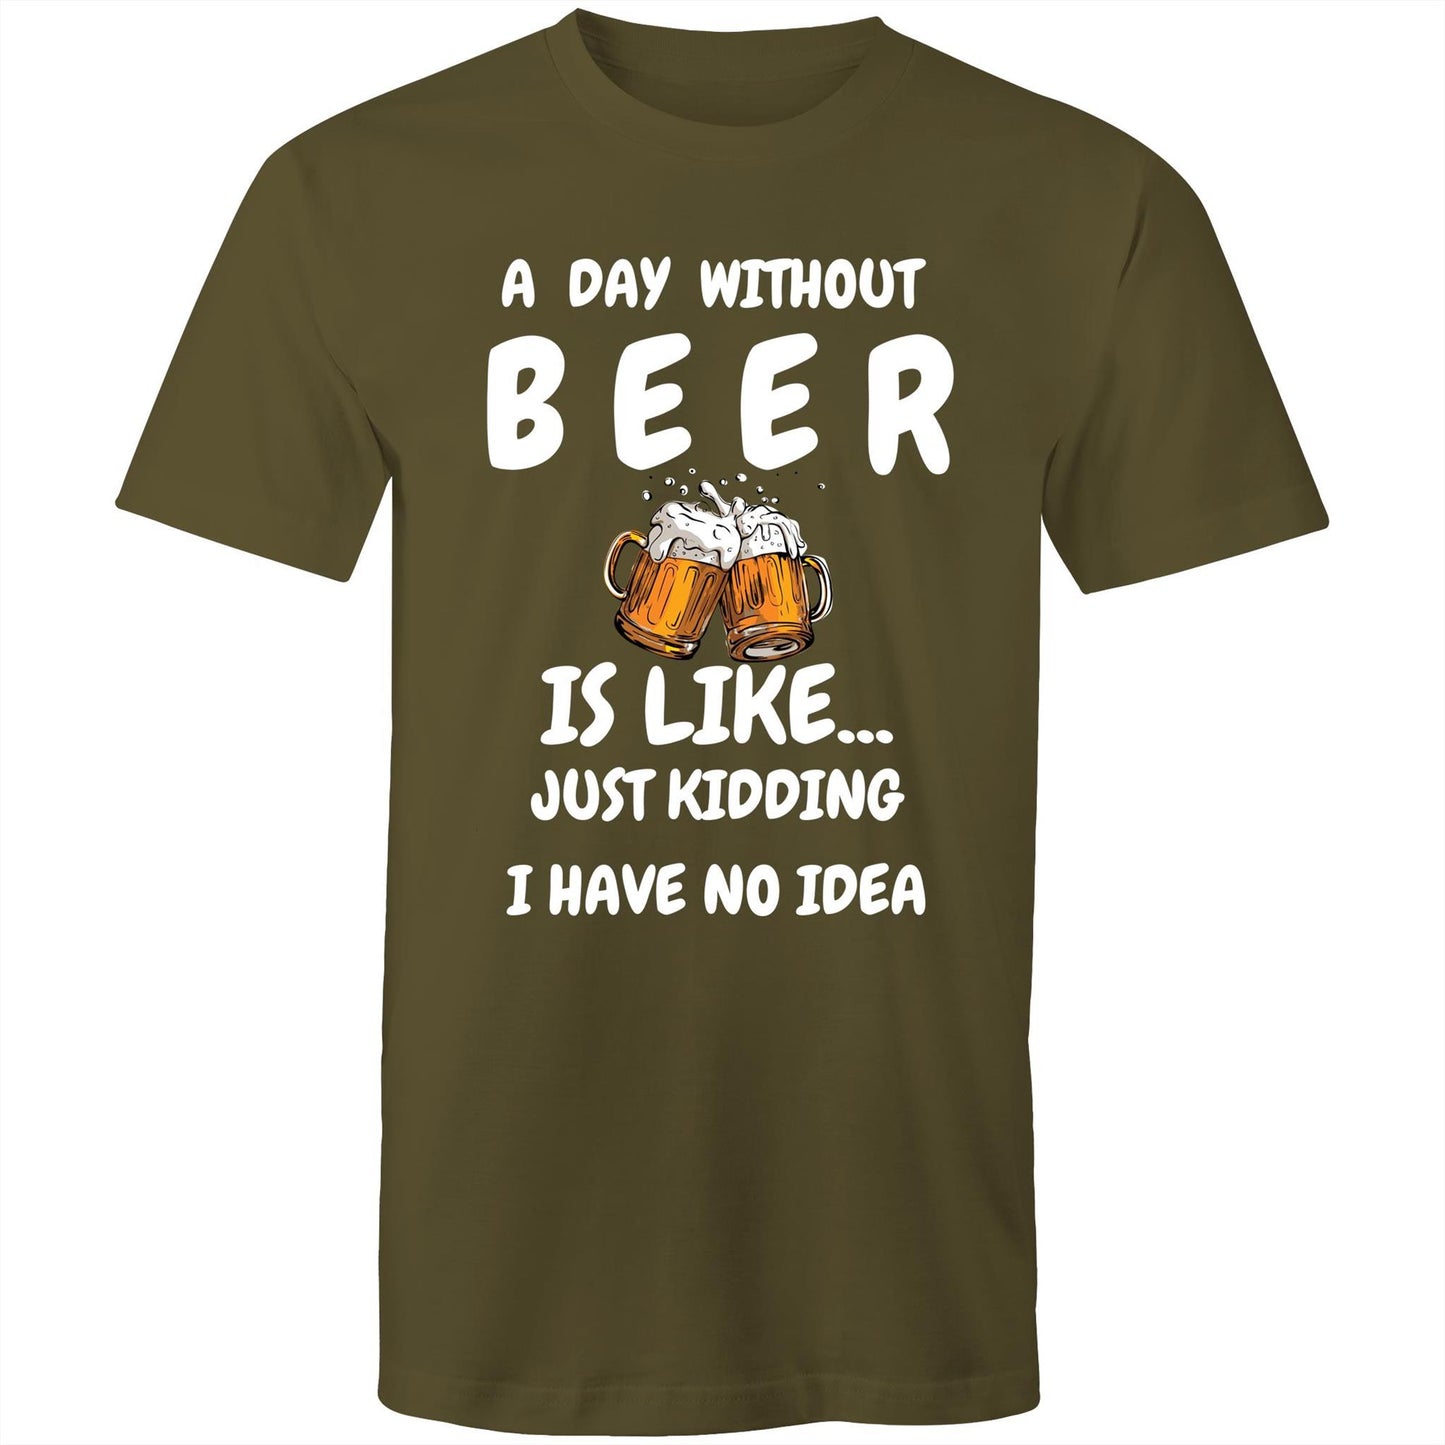 A Day Without Beer - Mens T-Shirt